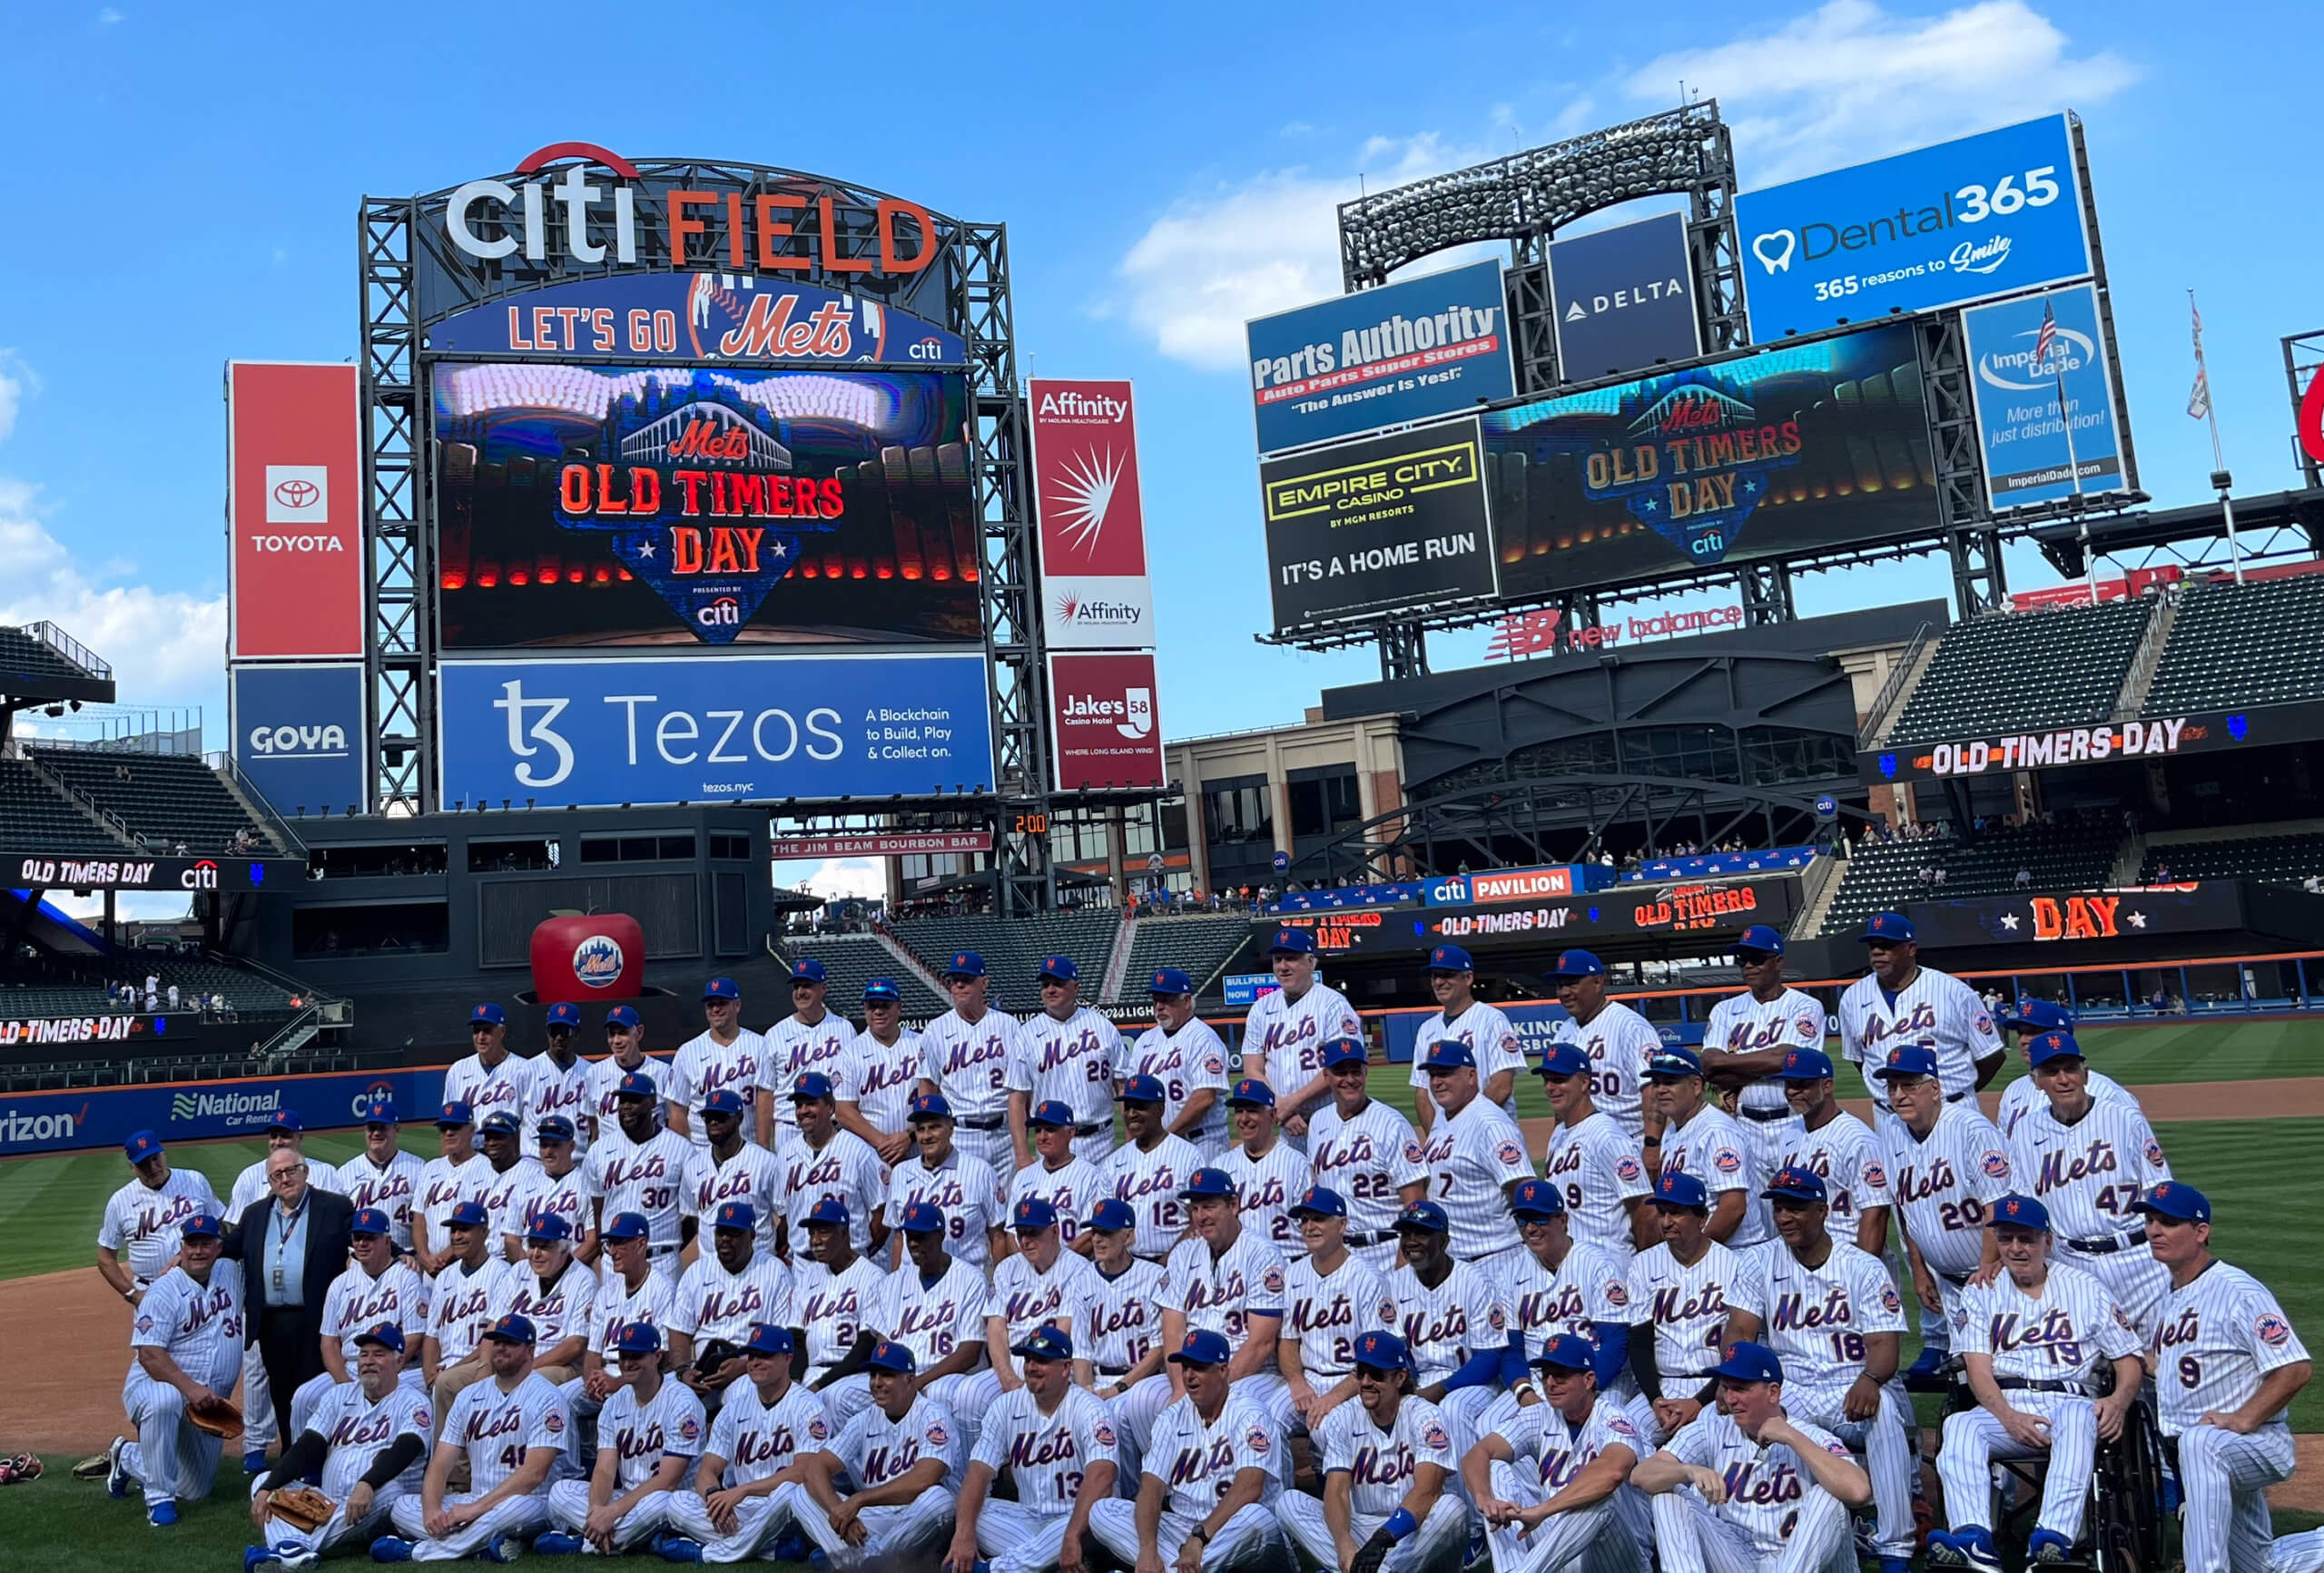 A Look at Mets Old Timers' Day, 08/28/2022